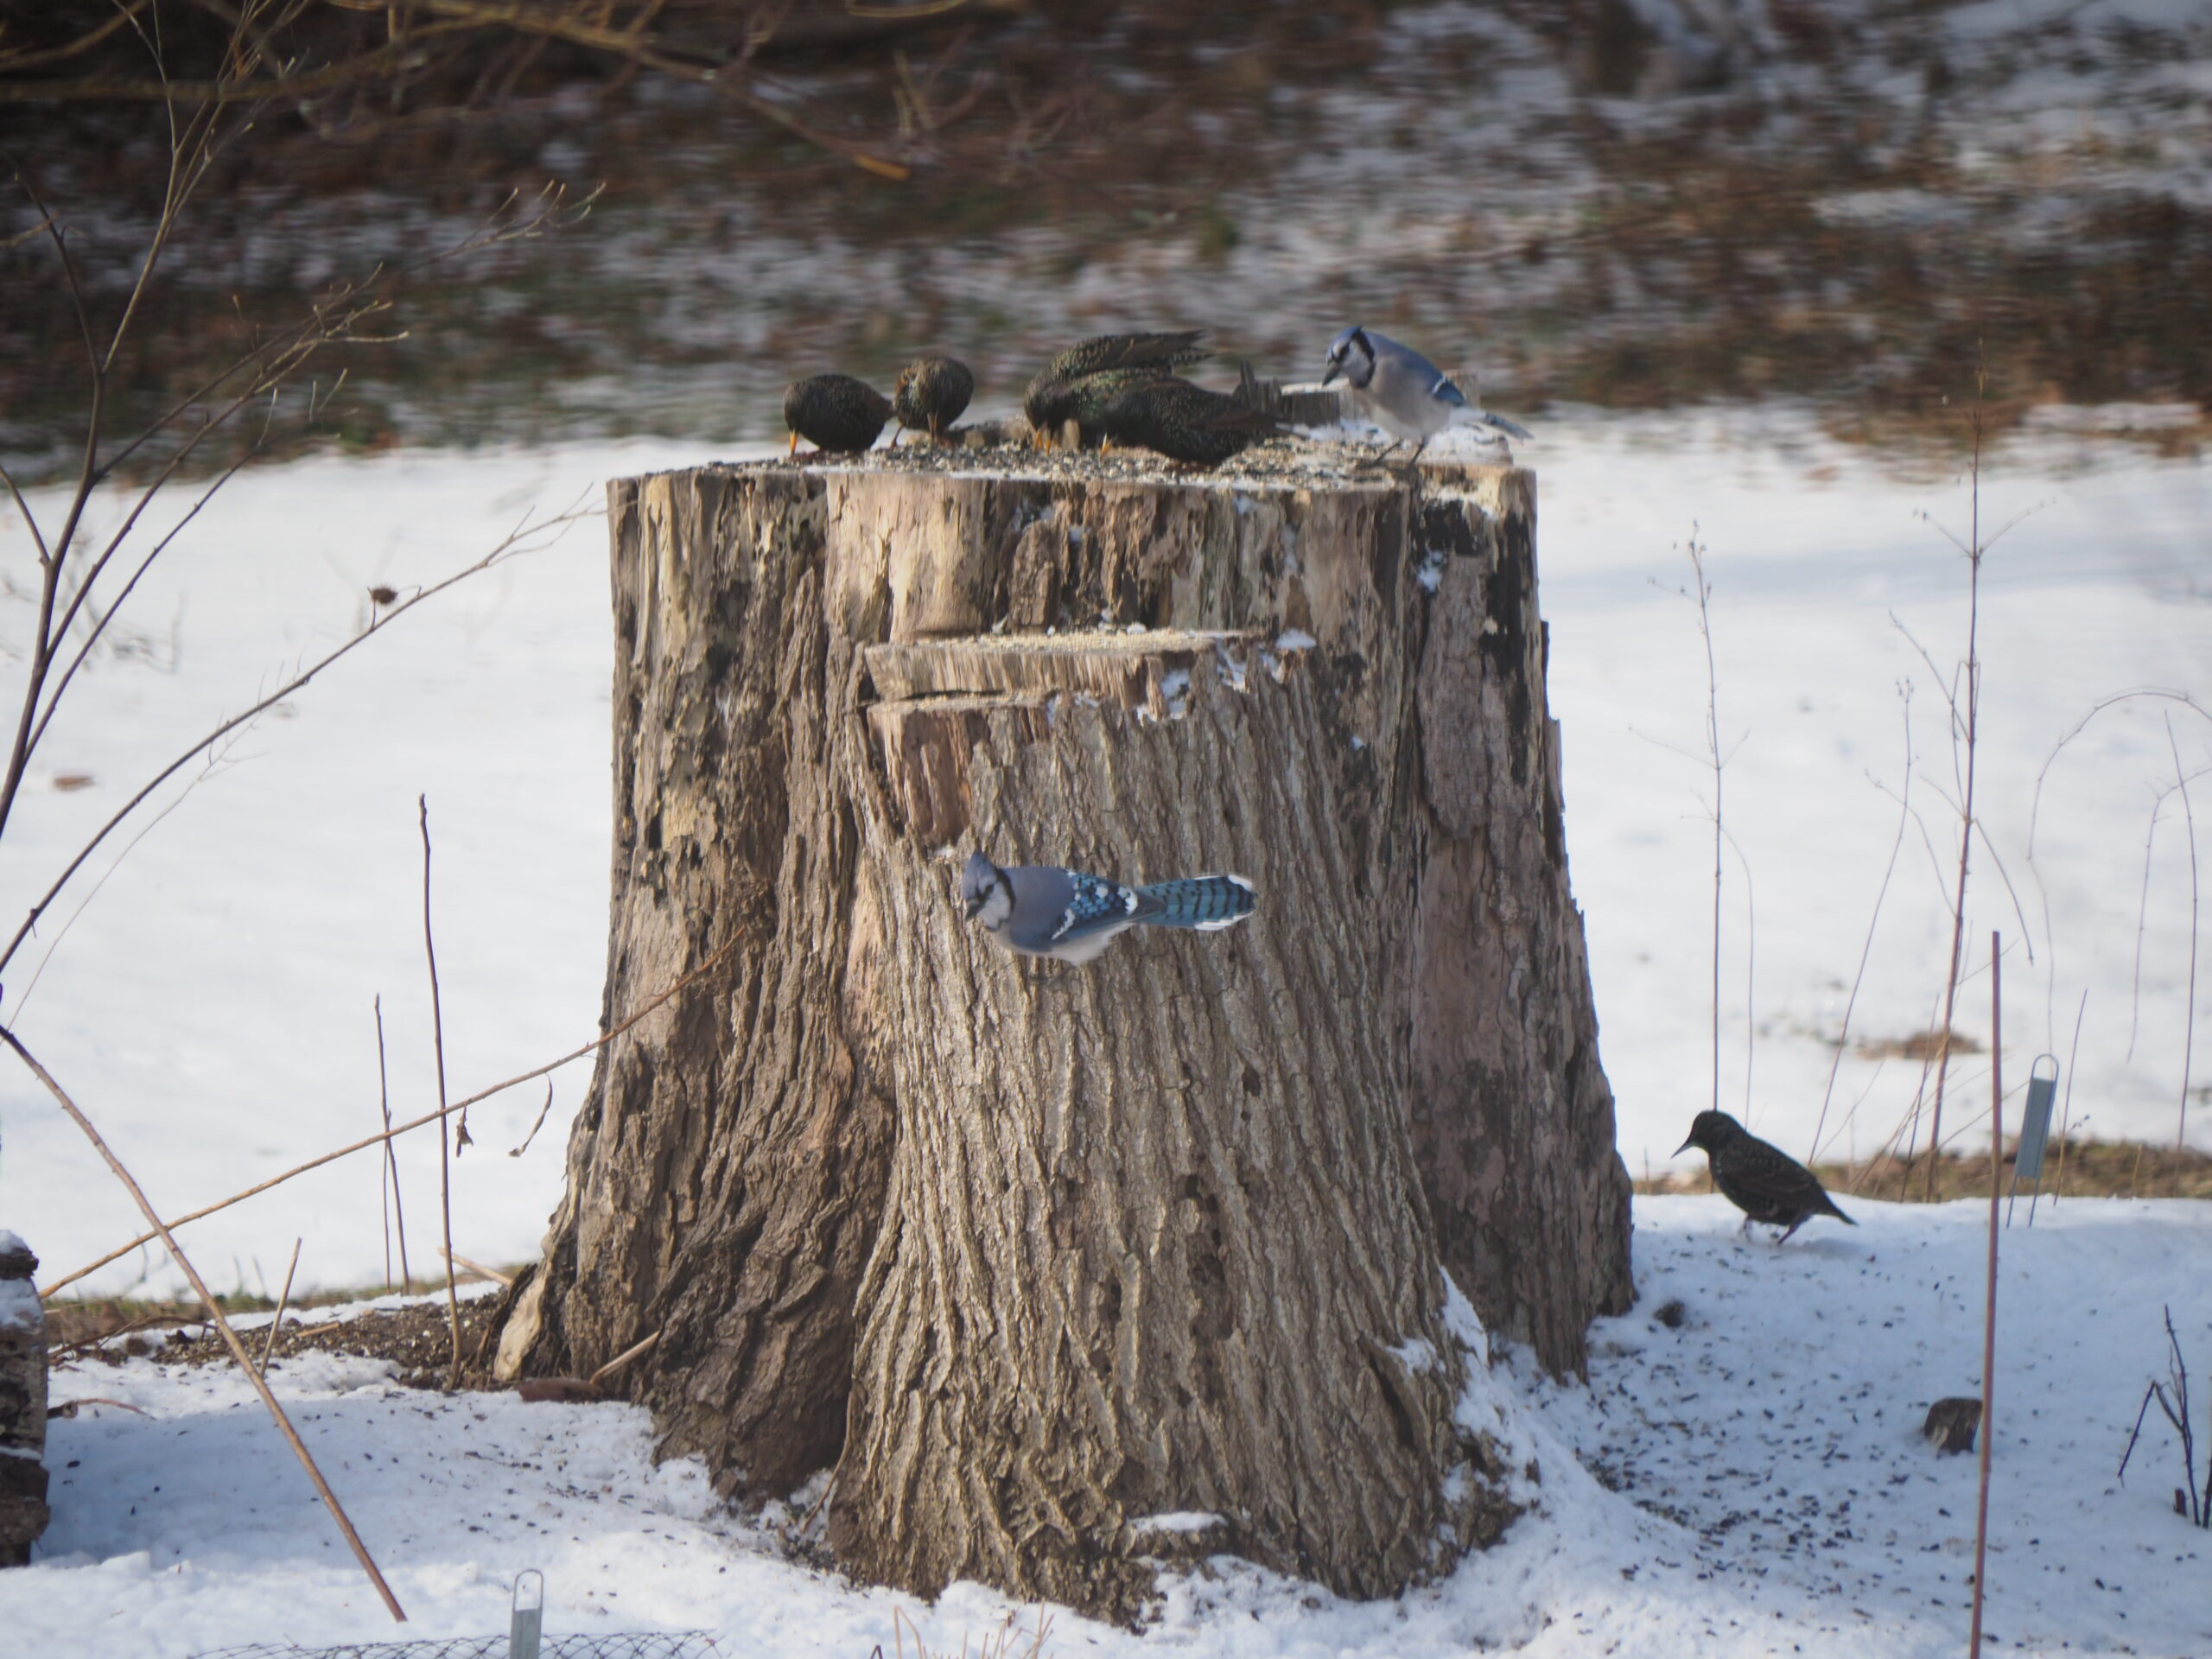 European starlings displace the blue jays as they examine what’s left from breakfast.  The starlings are never first on the stump but always show up to clean up what’s left. ANDREW MESSINGER